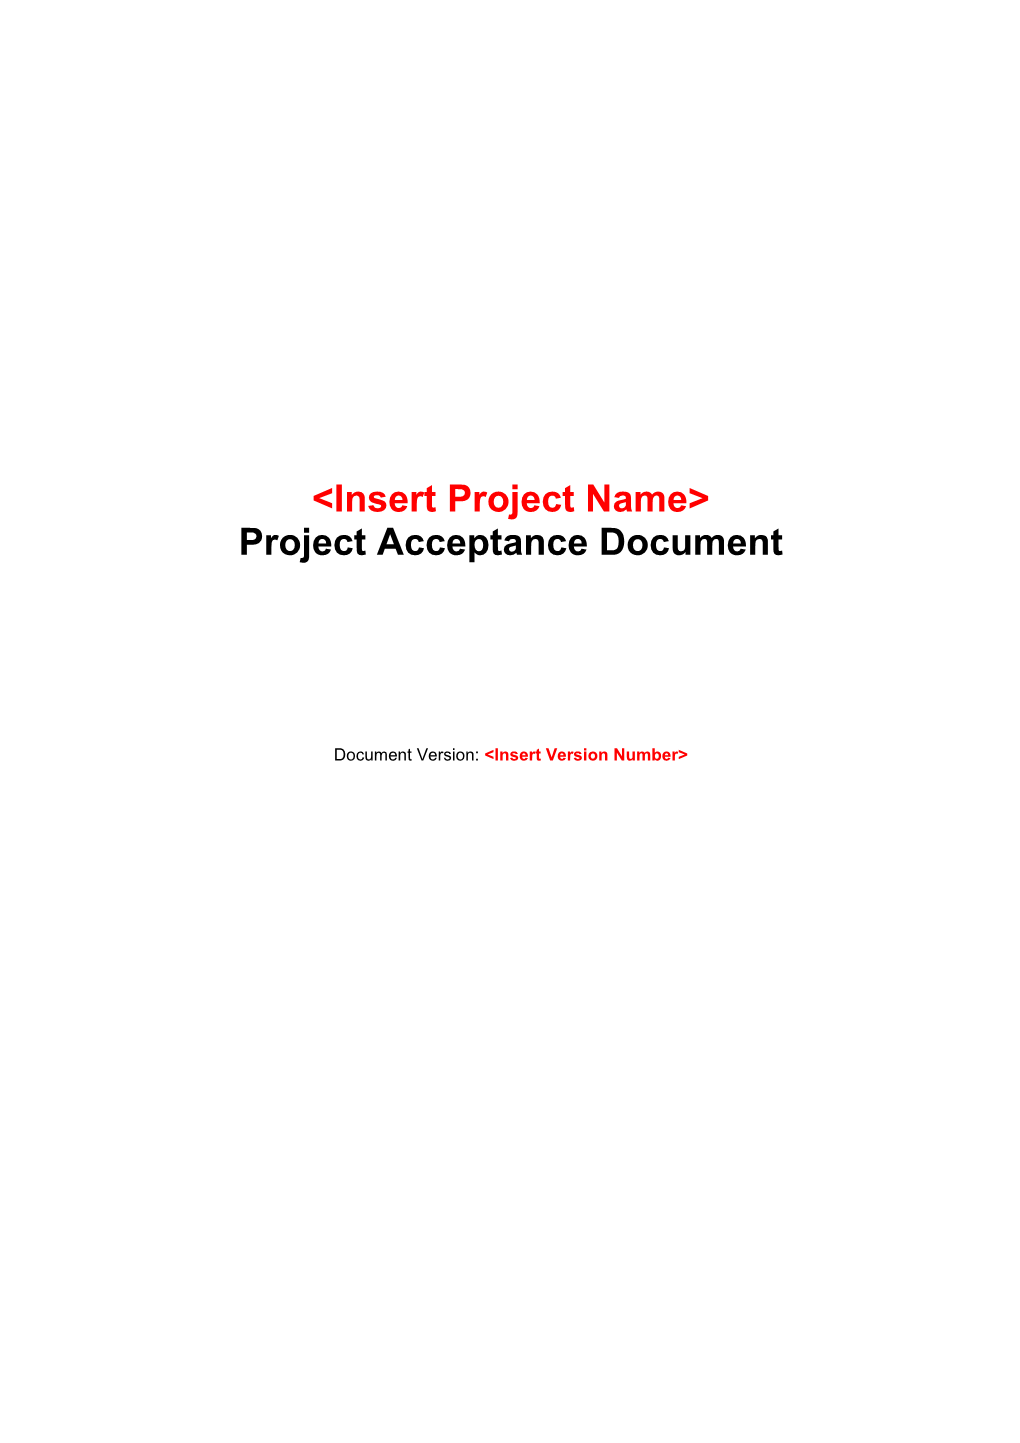 &lt;Insert Project Name&gt; Project Acceptance Document